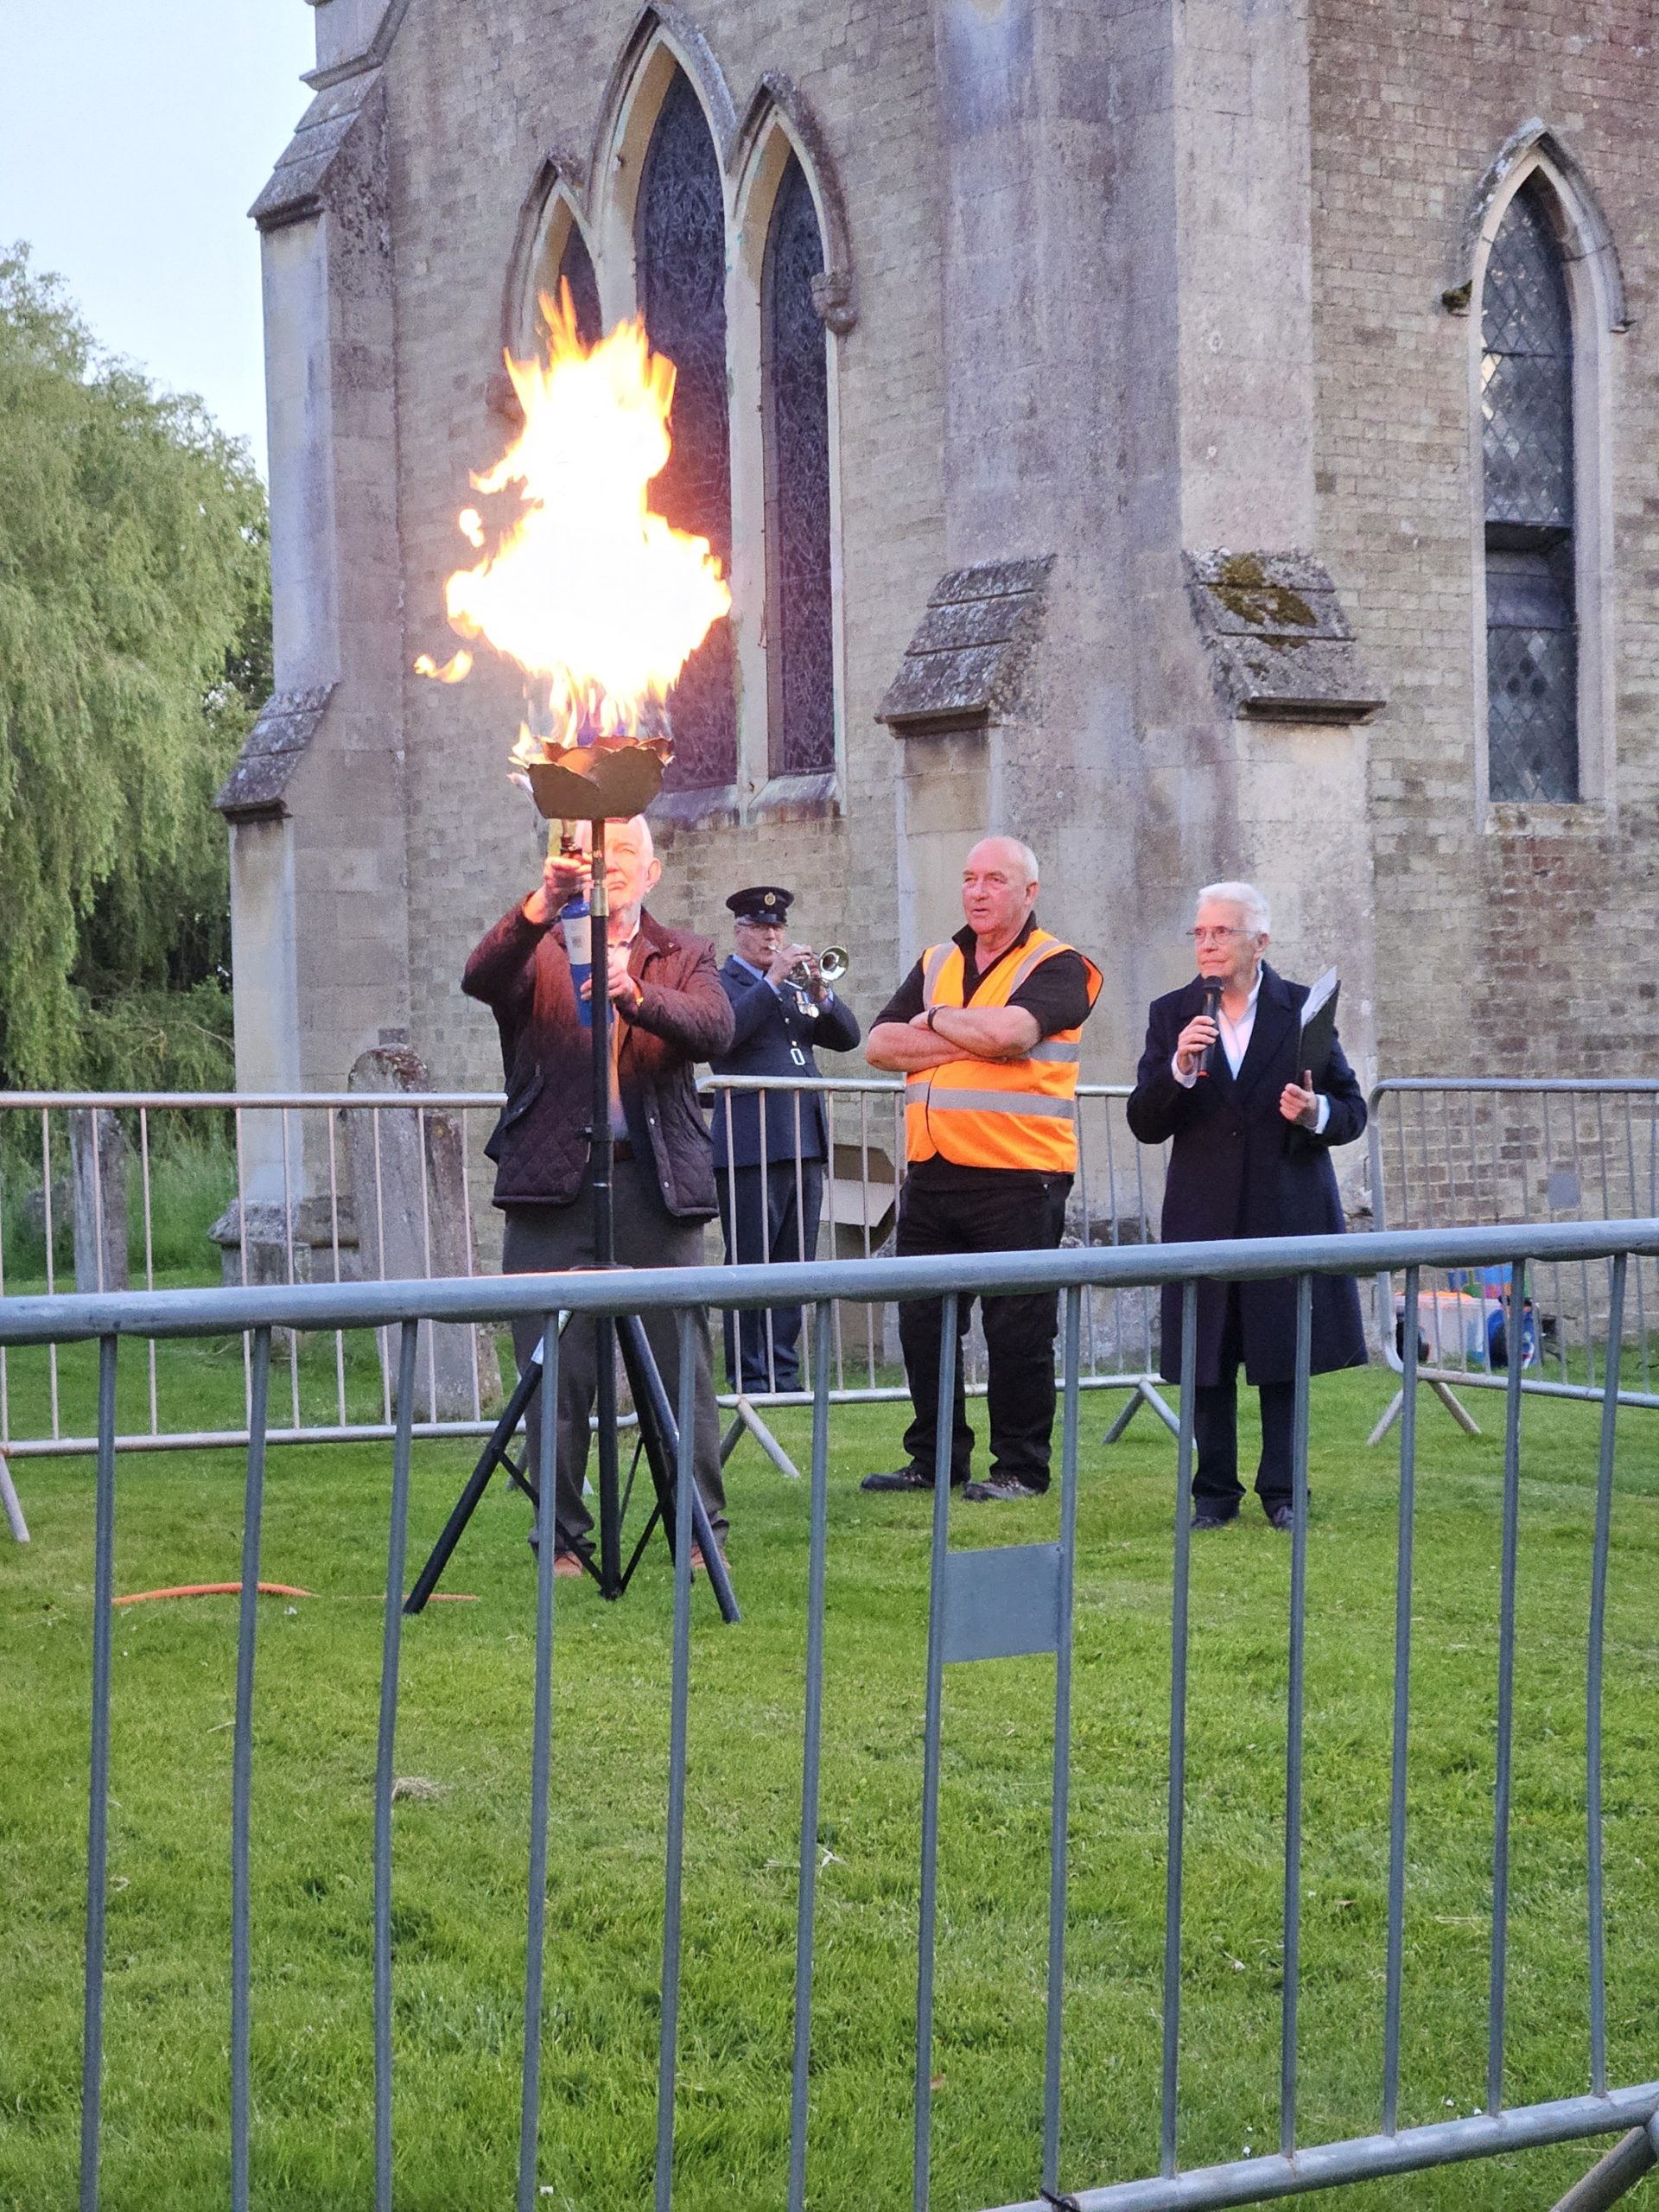 Freeman, Roy Reeves lighting the Beacon alongside the Chairman of Warboys Parish Council.